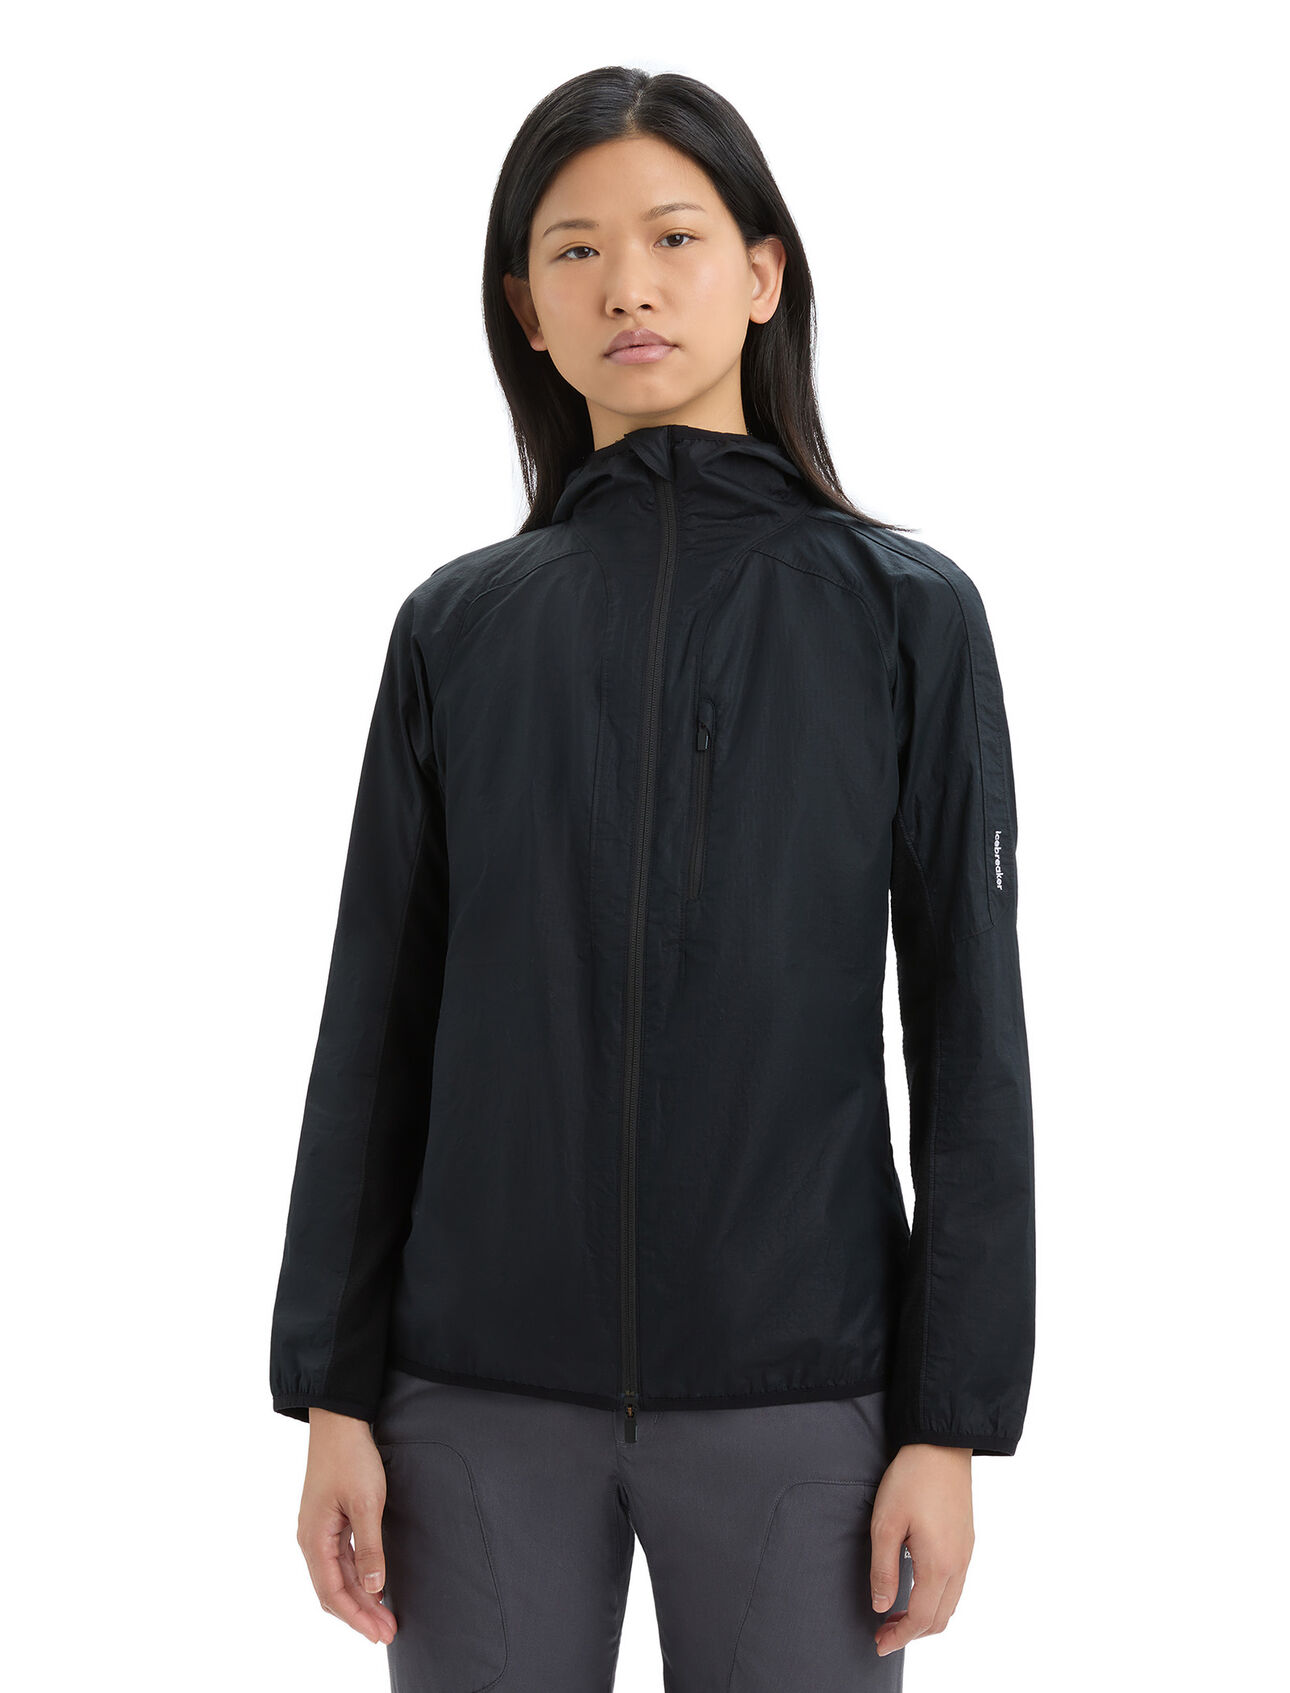 Womens Shell+™ Merino Cotton Windbreaker A lightweight layer that shields against the wind and light rain during active mountain adventures, the Shell+™ Cotton Windbreaker puts a natural spin on technical outerwear.